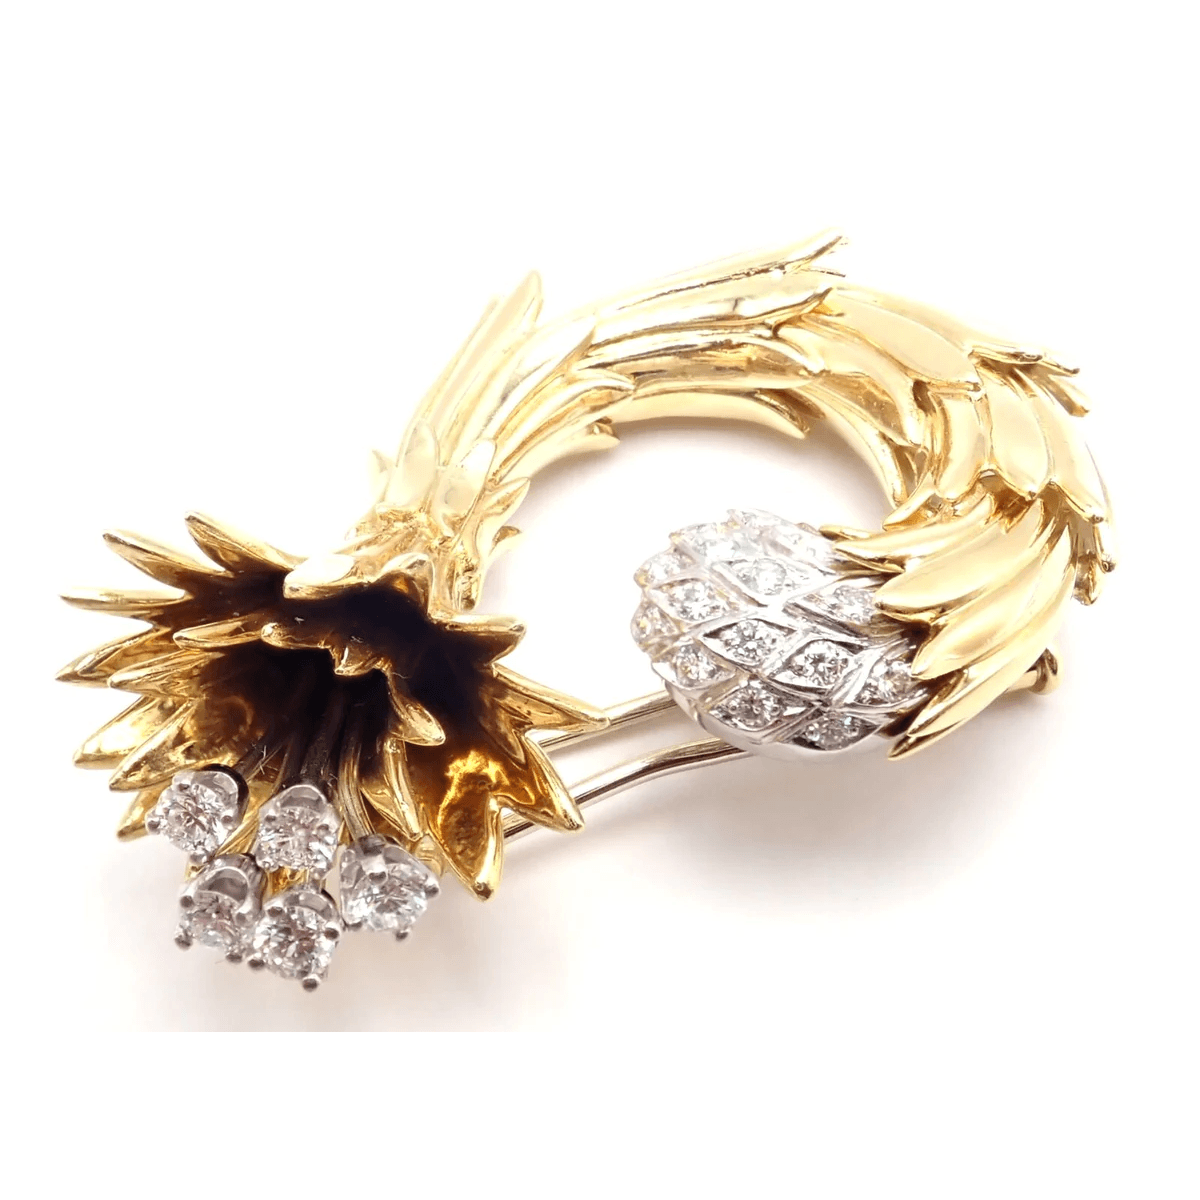 Jean Schlumberger Tiffany & Co. Post-1980s Platinum & 18KT Yellow Gold Diamond Brooch front